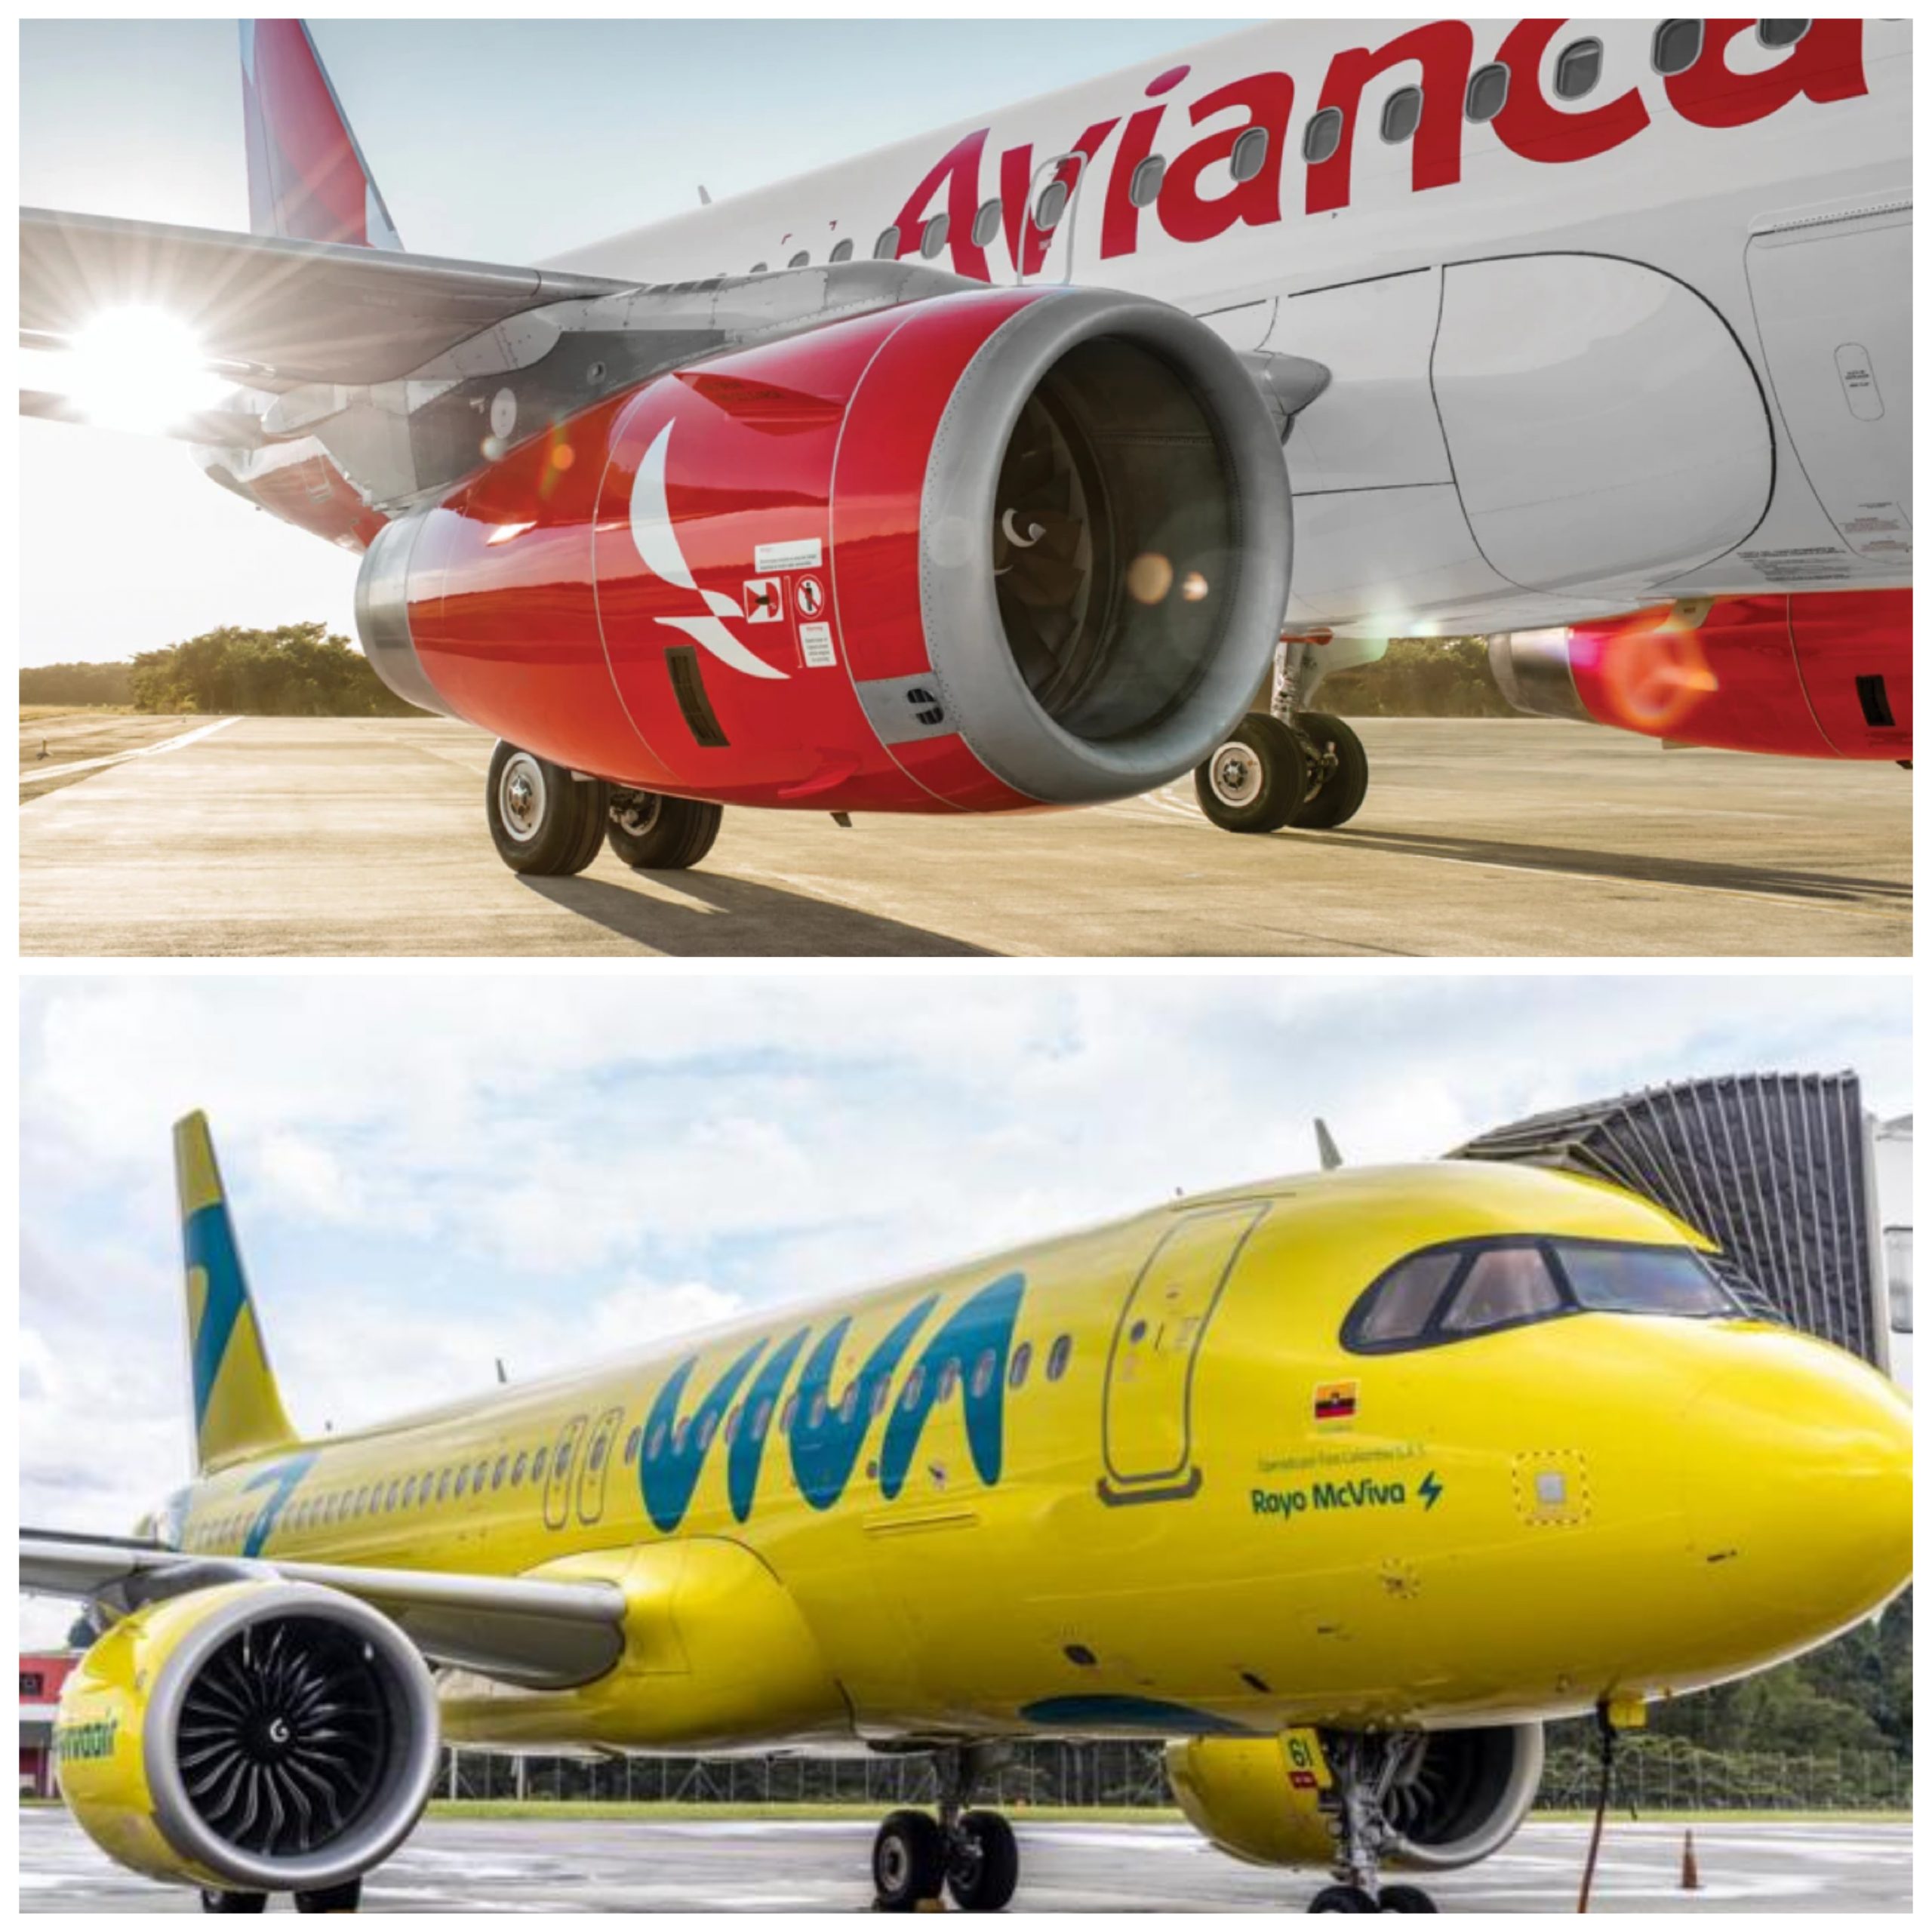 Avianca Airlines and Viva Air want to be part of a single business group, there is already an agreement